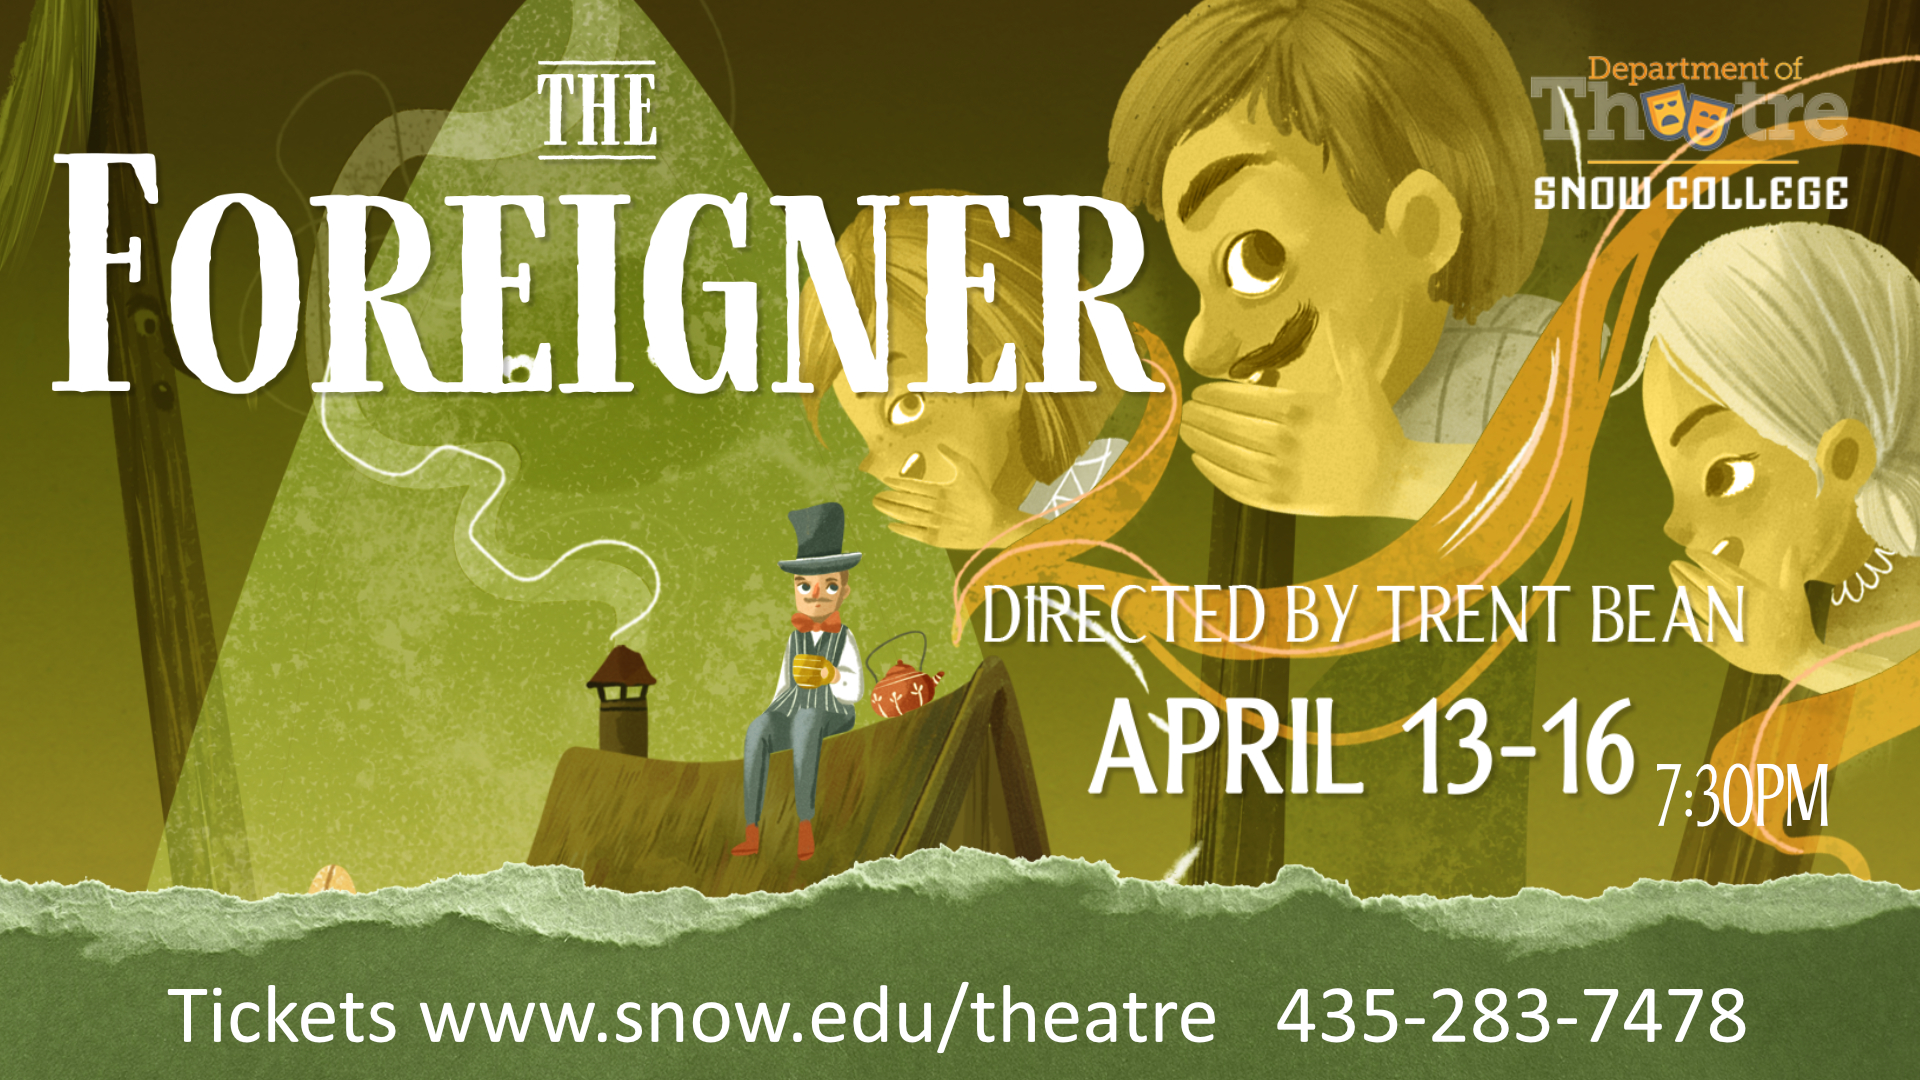 The Foreigner, Directed by Trent Bean, April 13-16, 7:30pm Tickets at www.snow.edu/theatre 435-283-7478